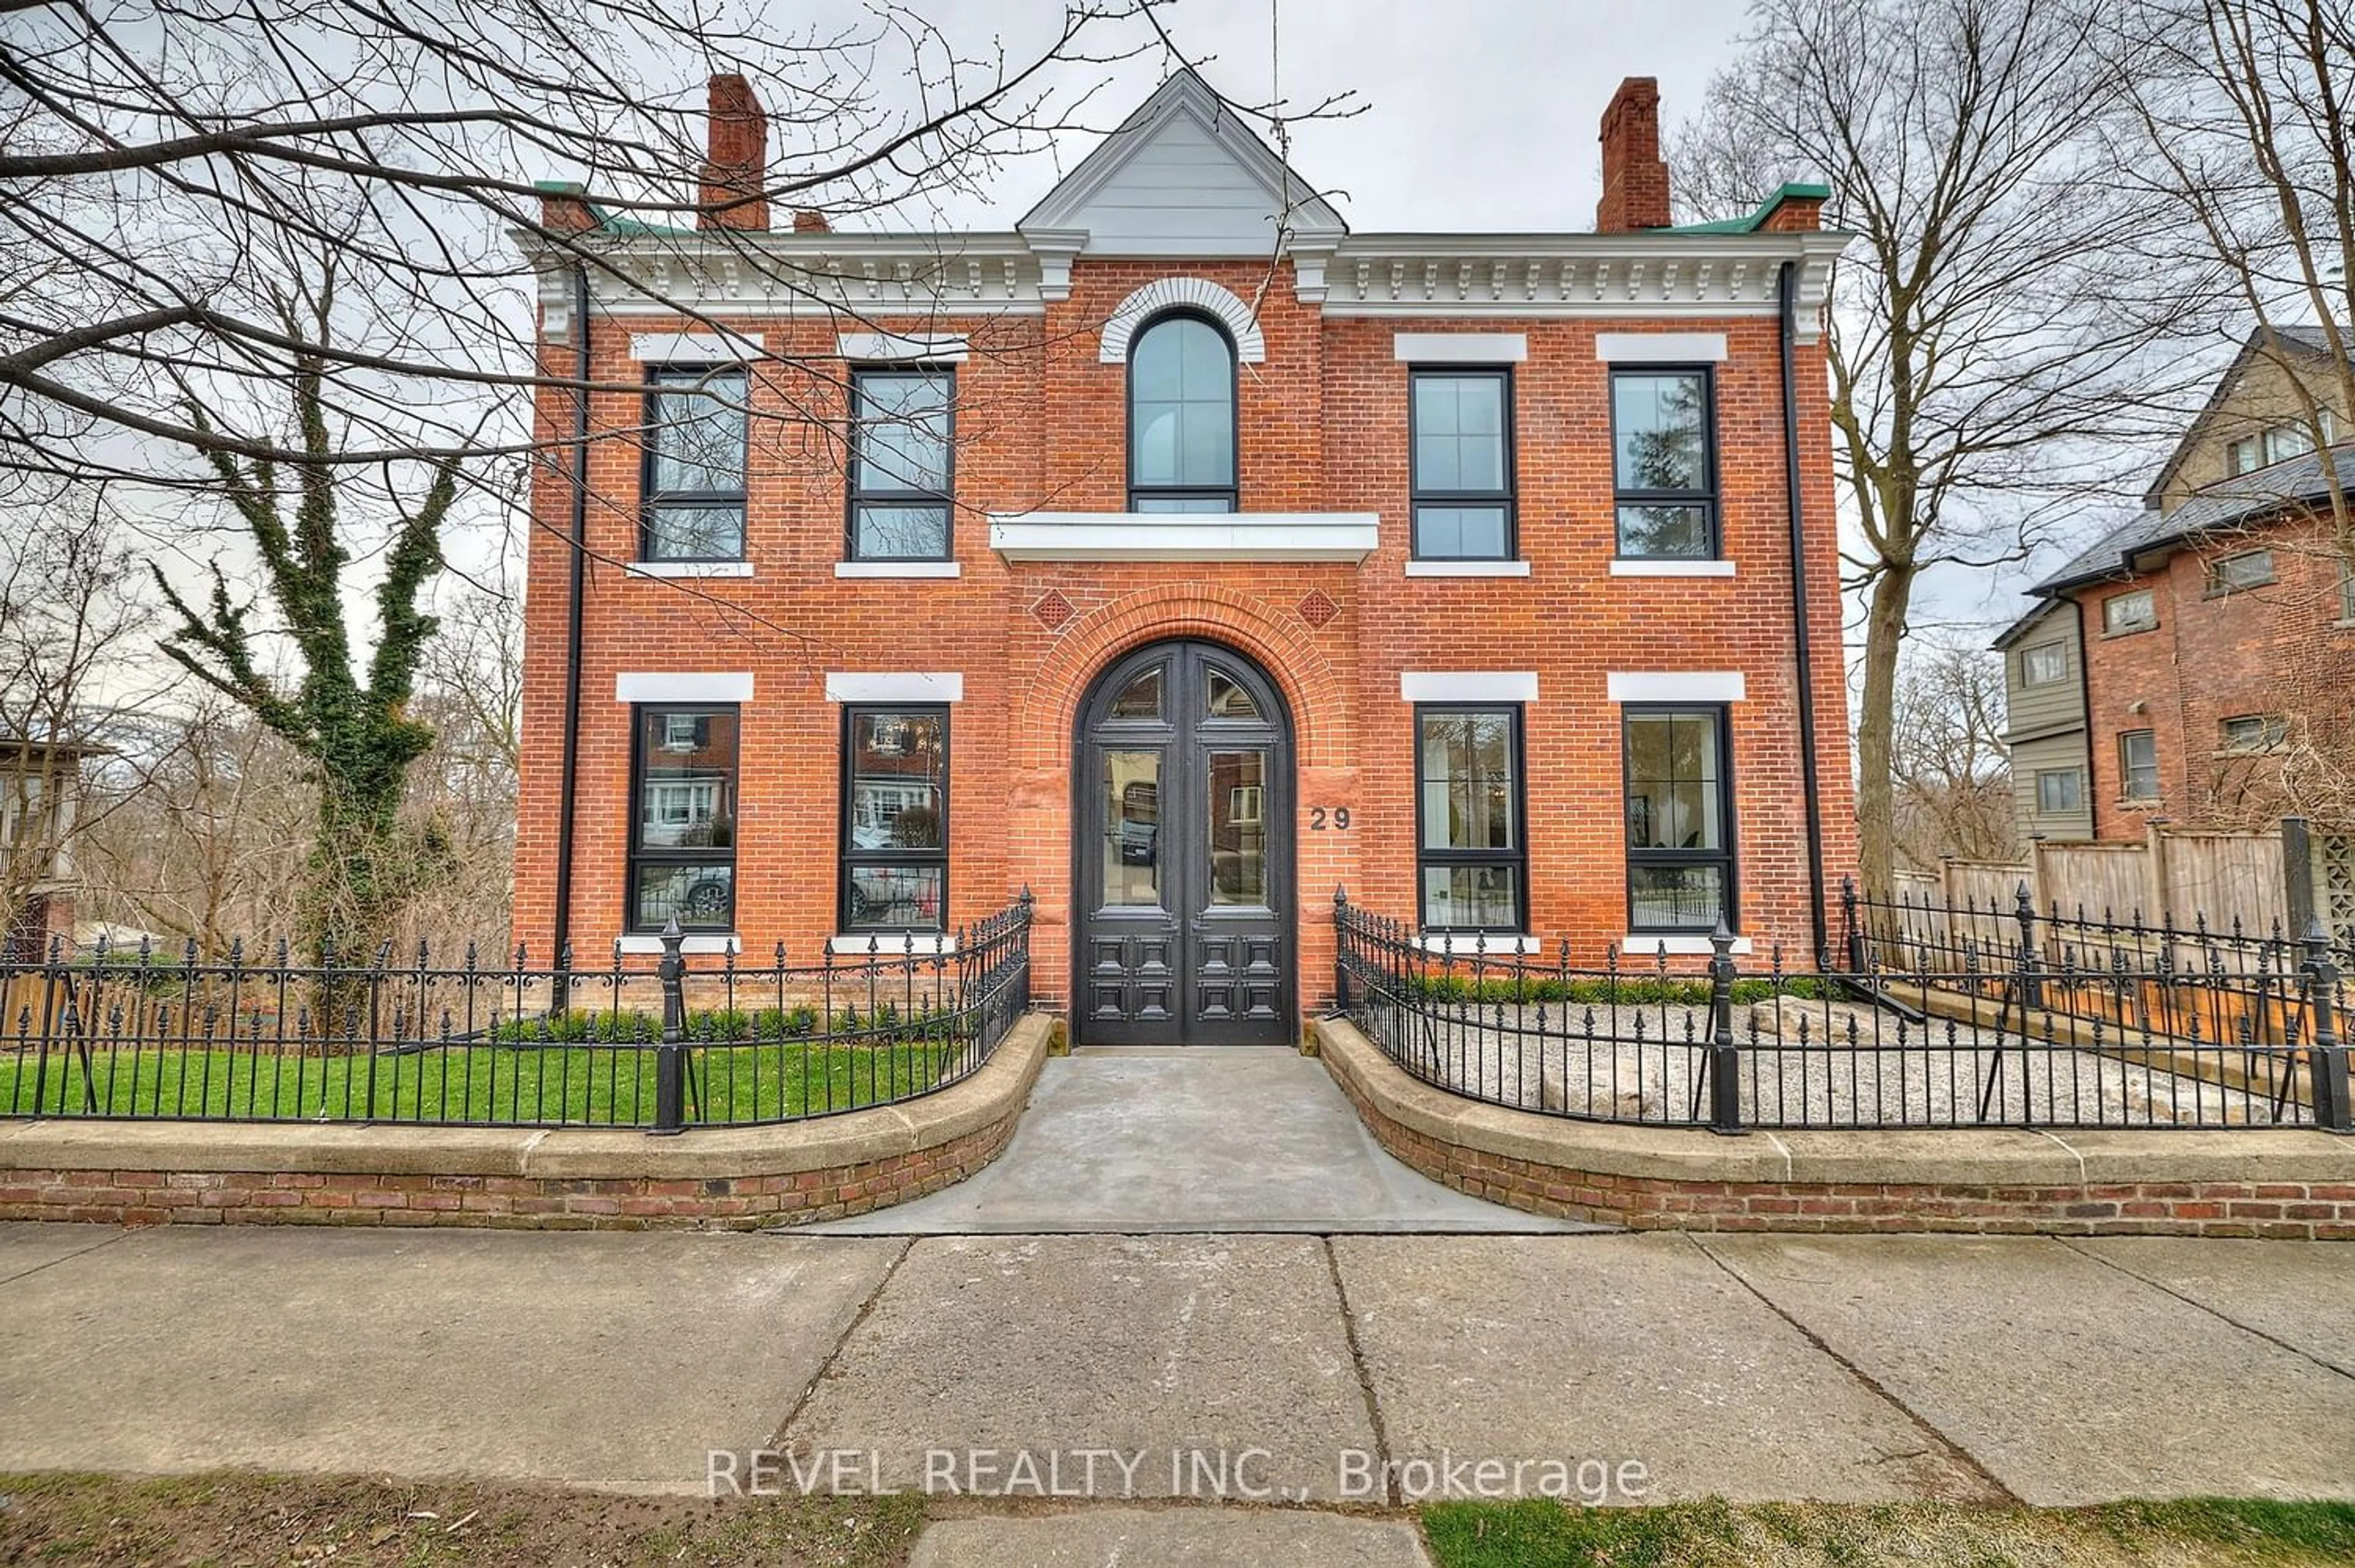 Home with brick exterior material for 29 Yates St, St. Catharines Ontario L2R 5R3